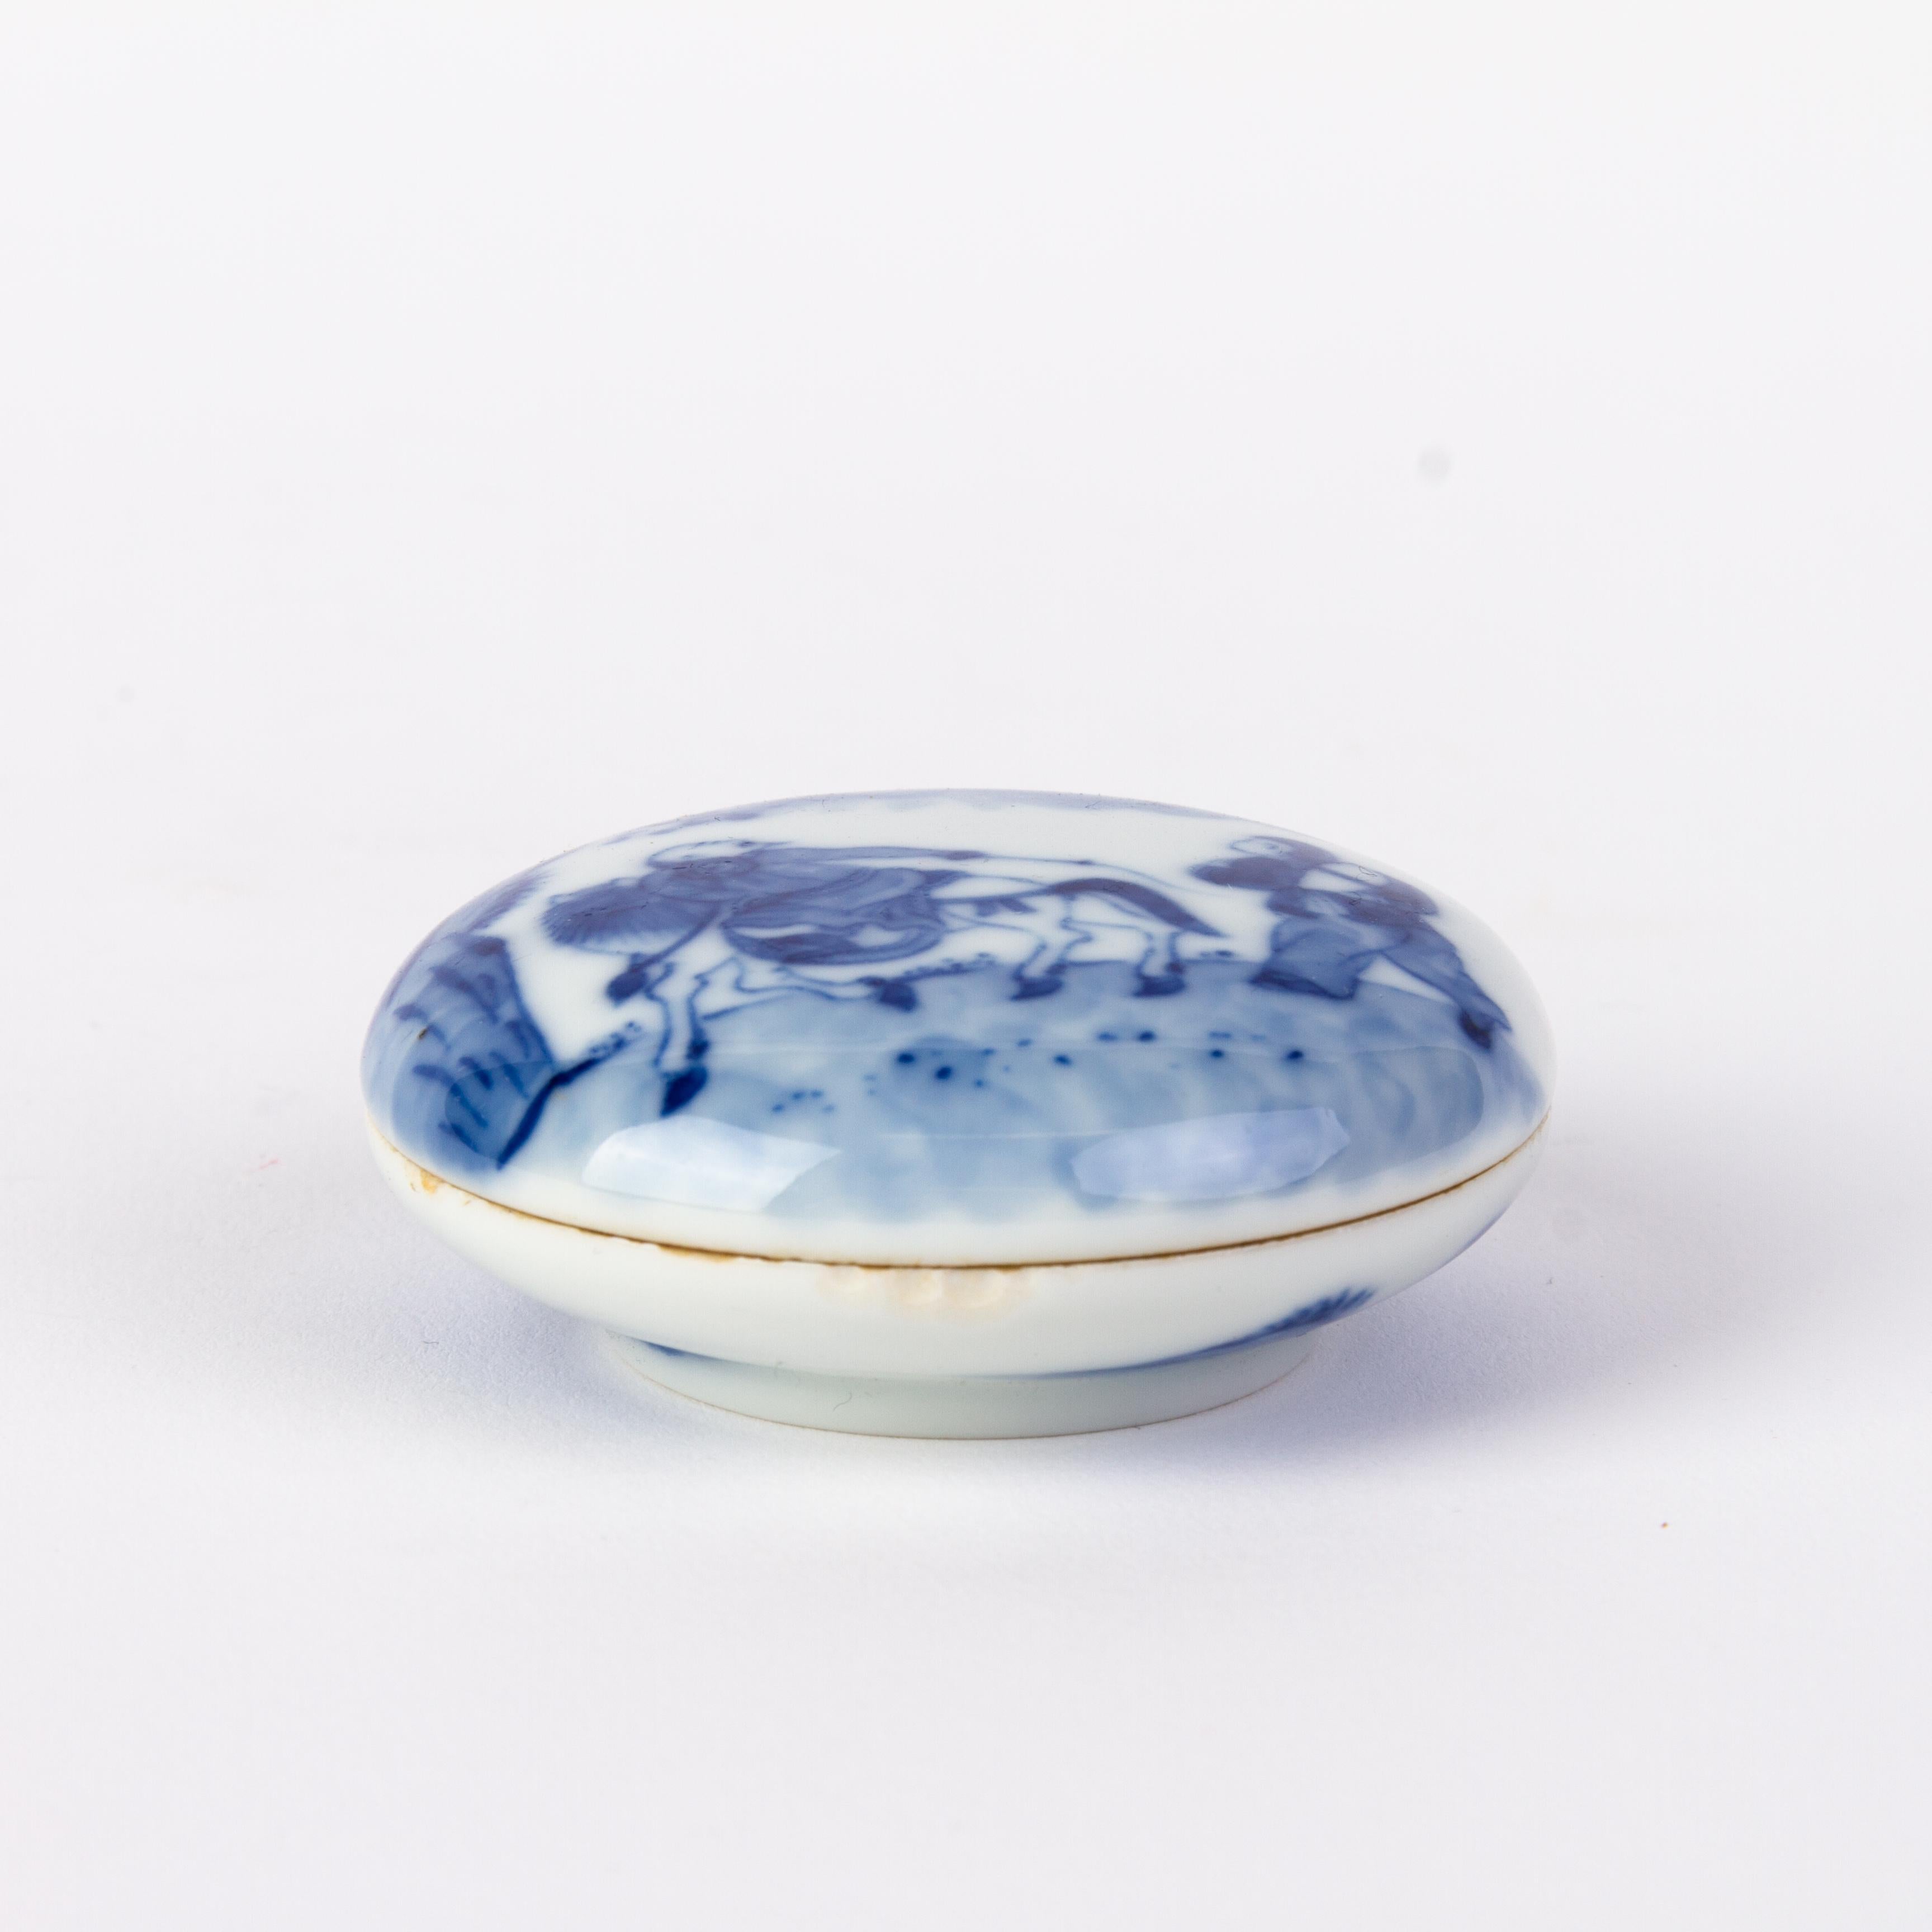 Chinese Daoguang Blue & White Porcelain Lidded Box with Seal Mark 19th Century For Sale 2